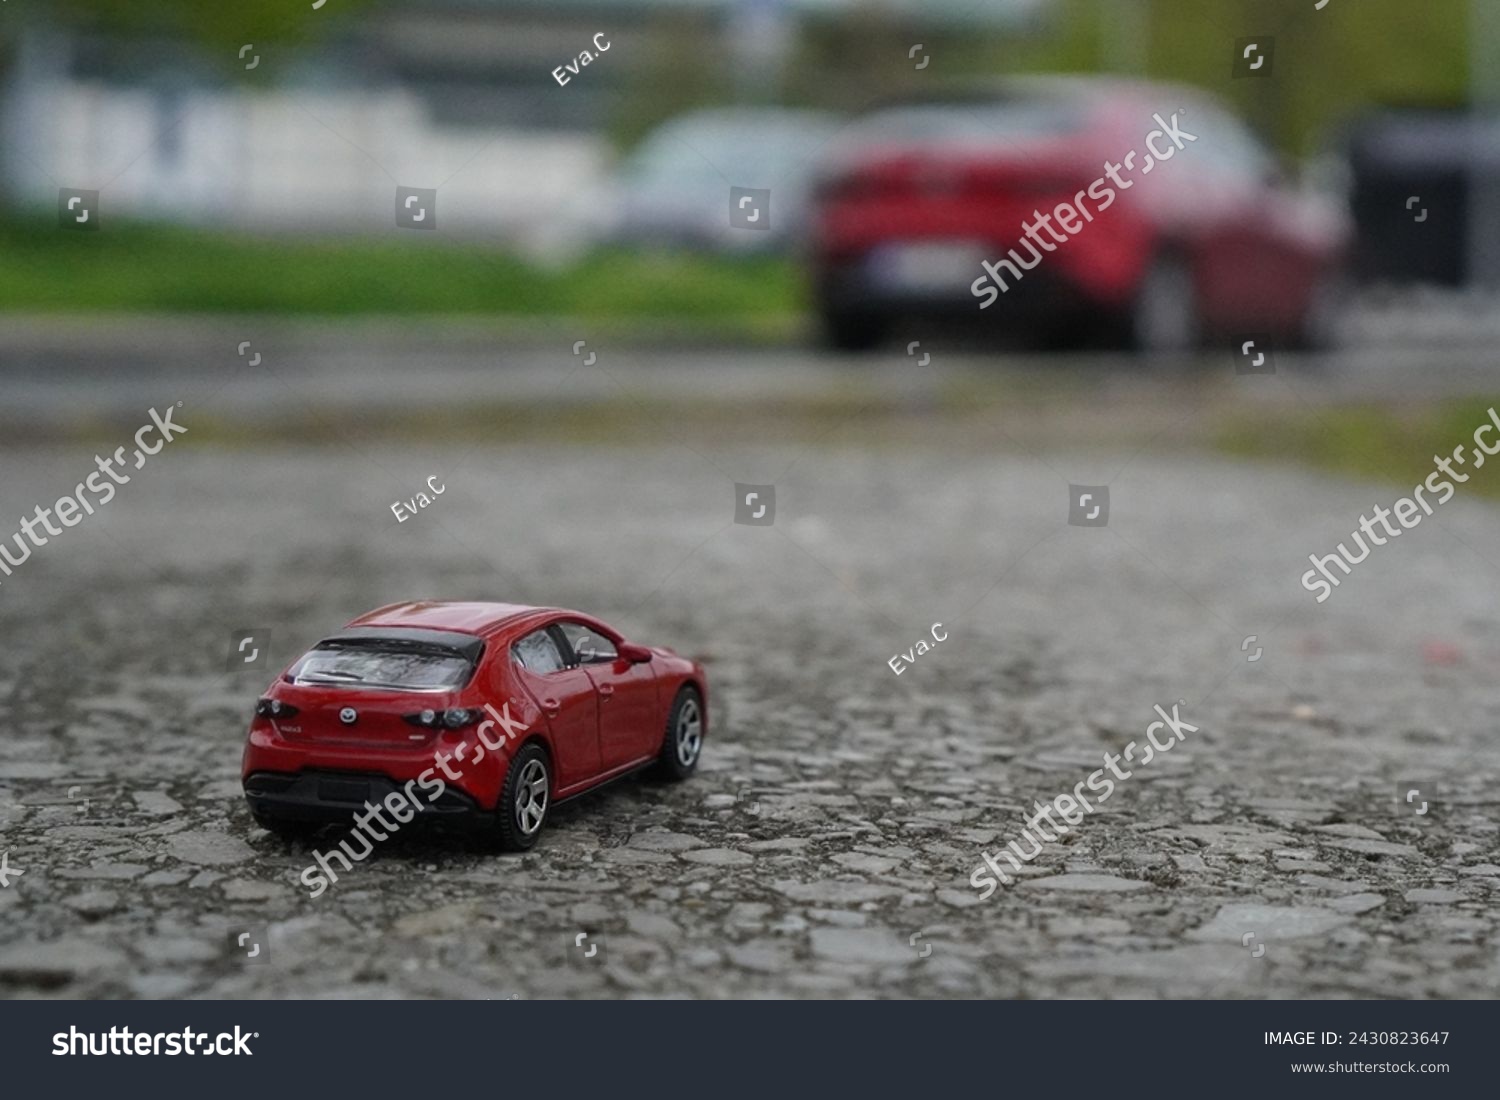 model mazda 3 car from HotWheels with a real japanese Mazda 3 car in red colour #2430823647